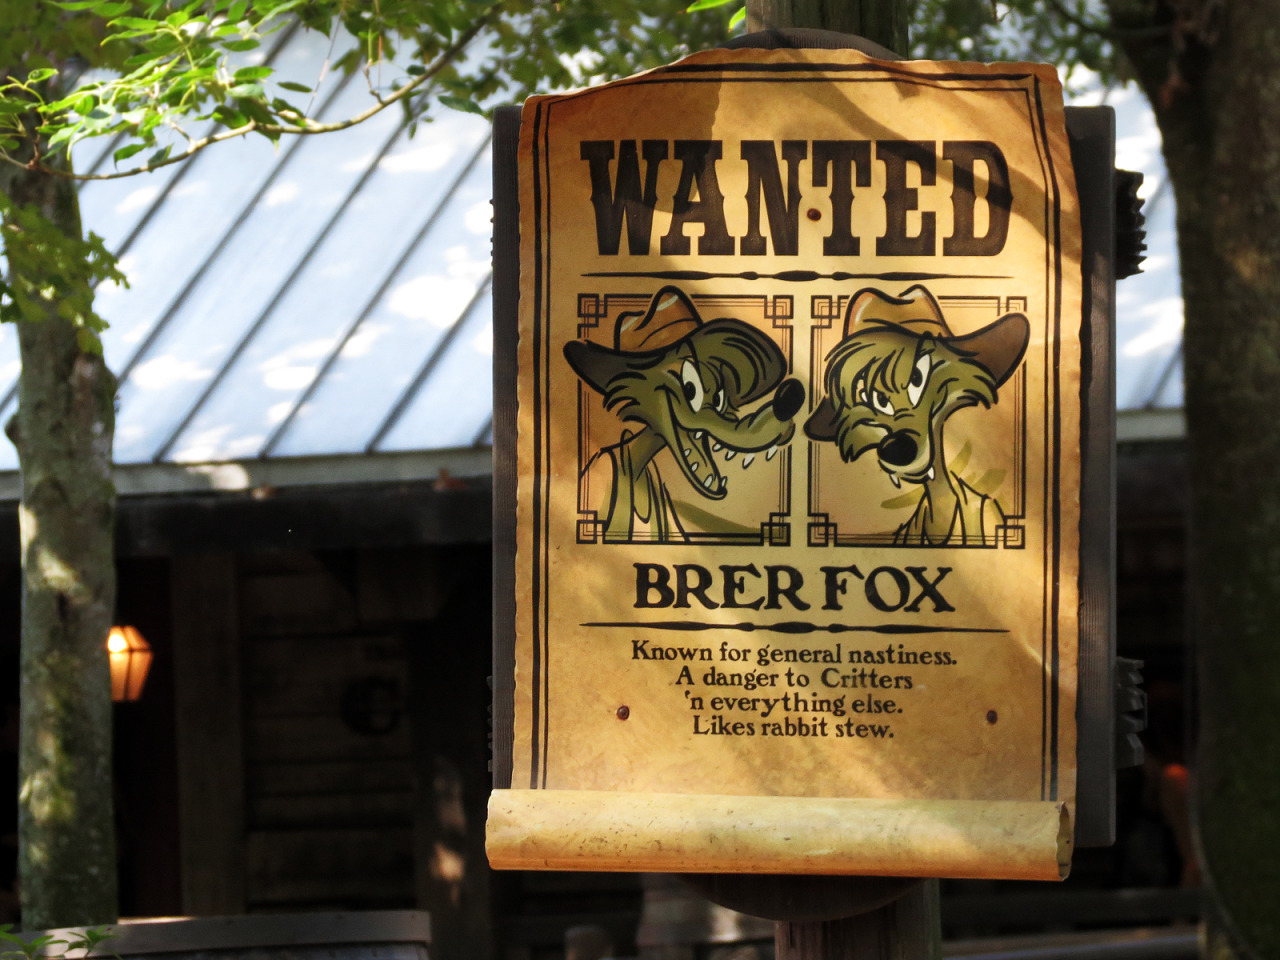 Theme Park Photos and More — Wanted: Brer Fox by meeko_ Via Flickr: ...